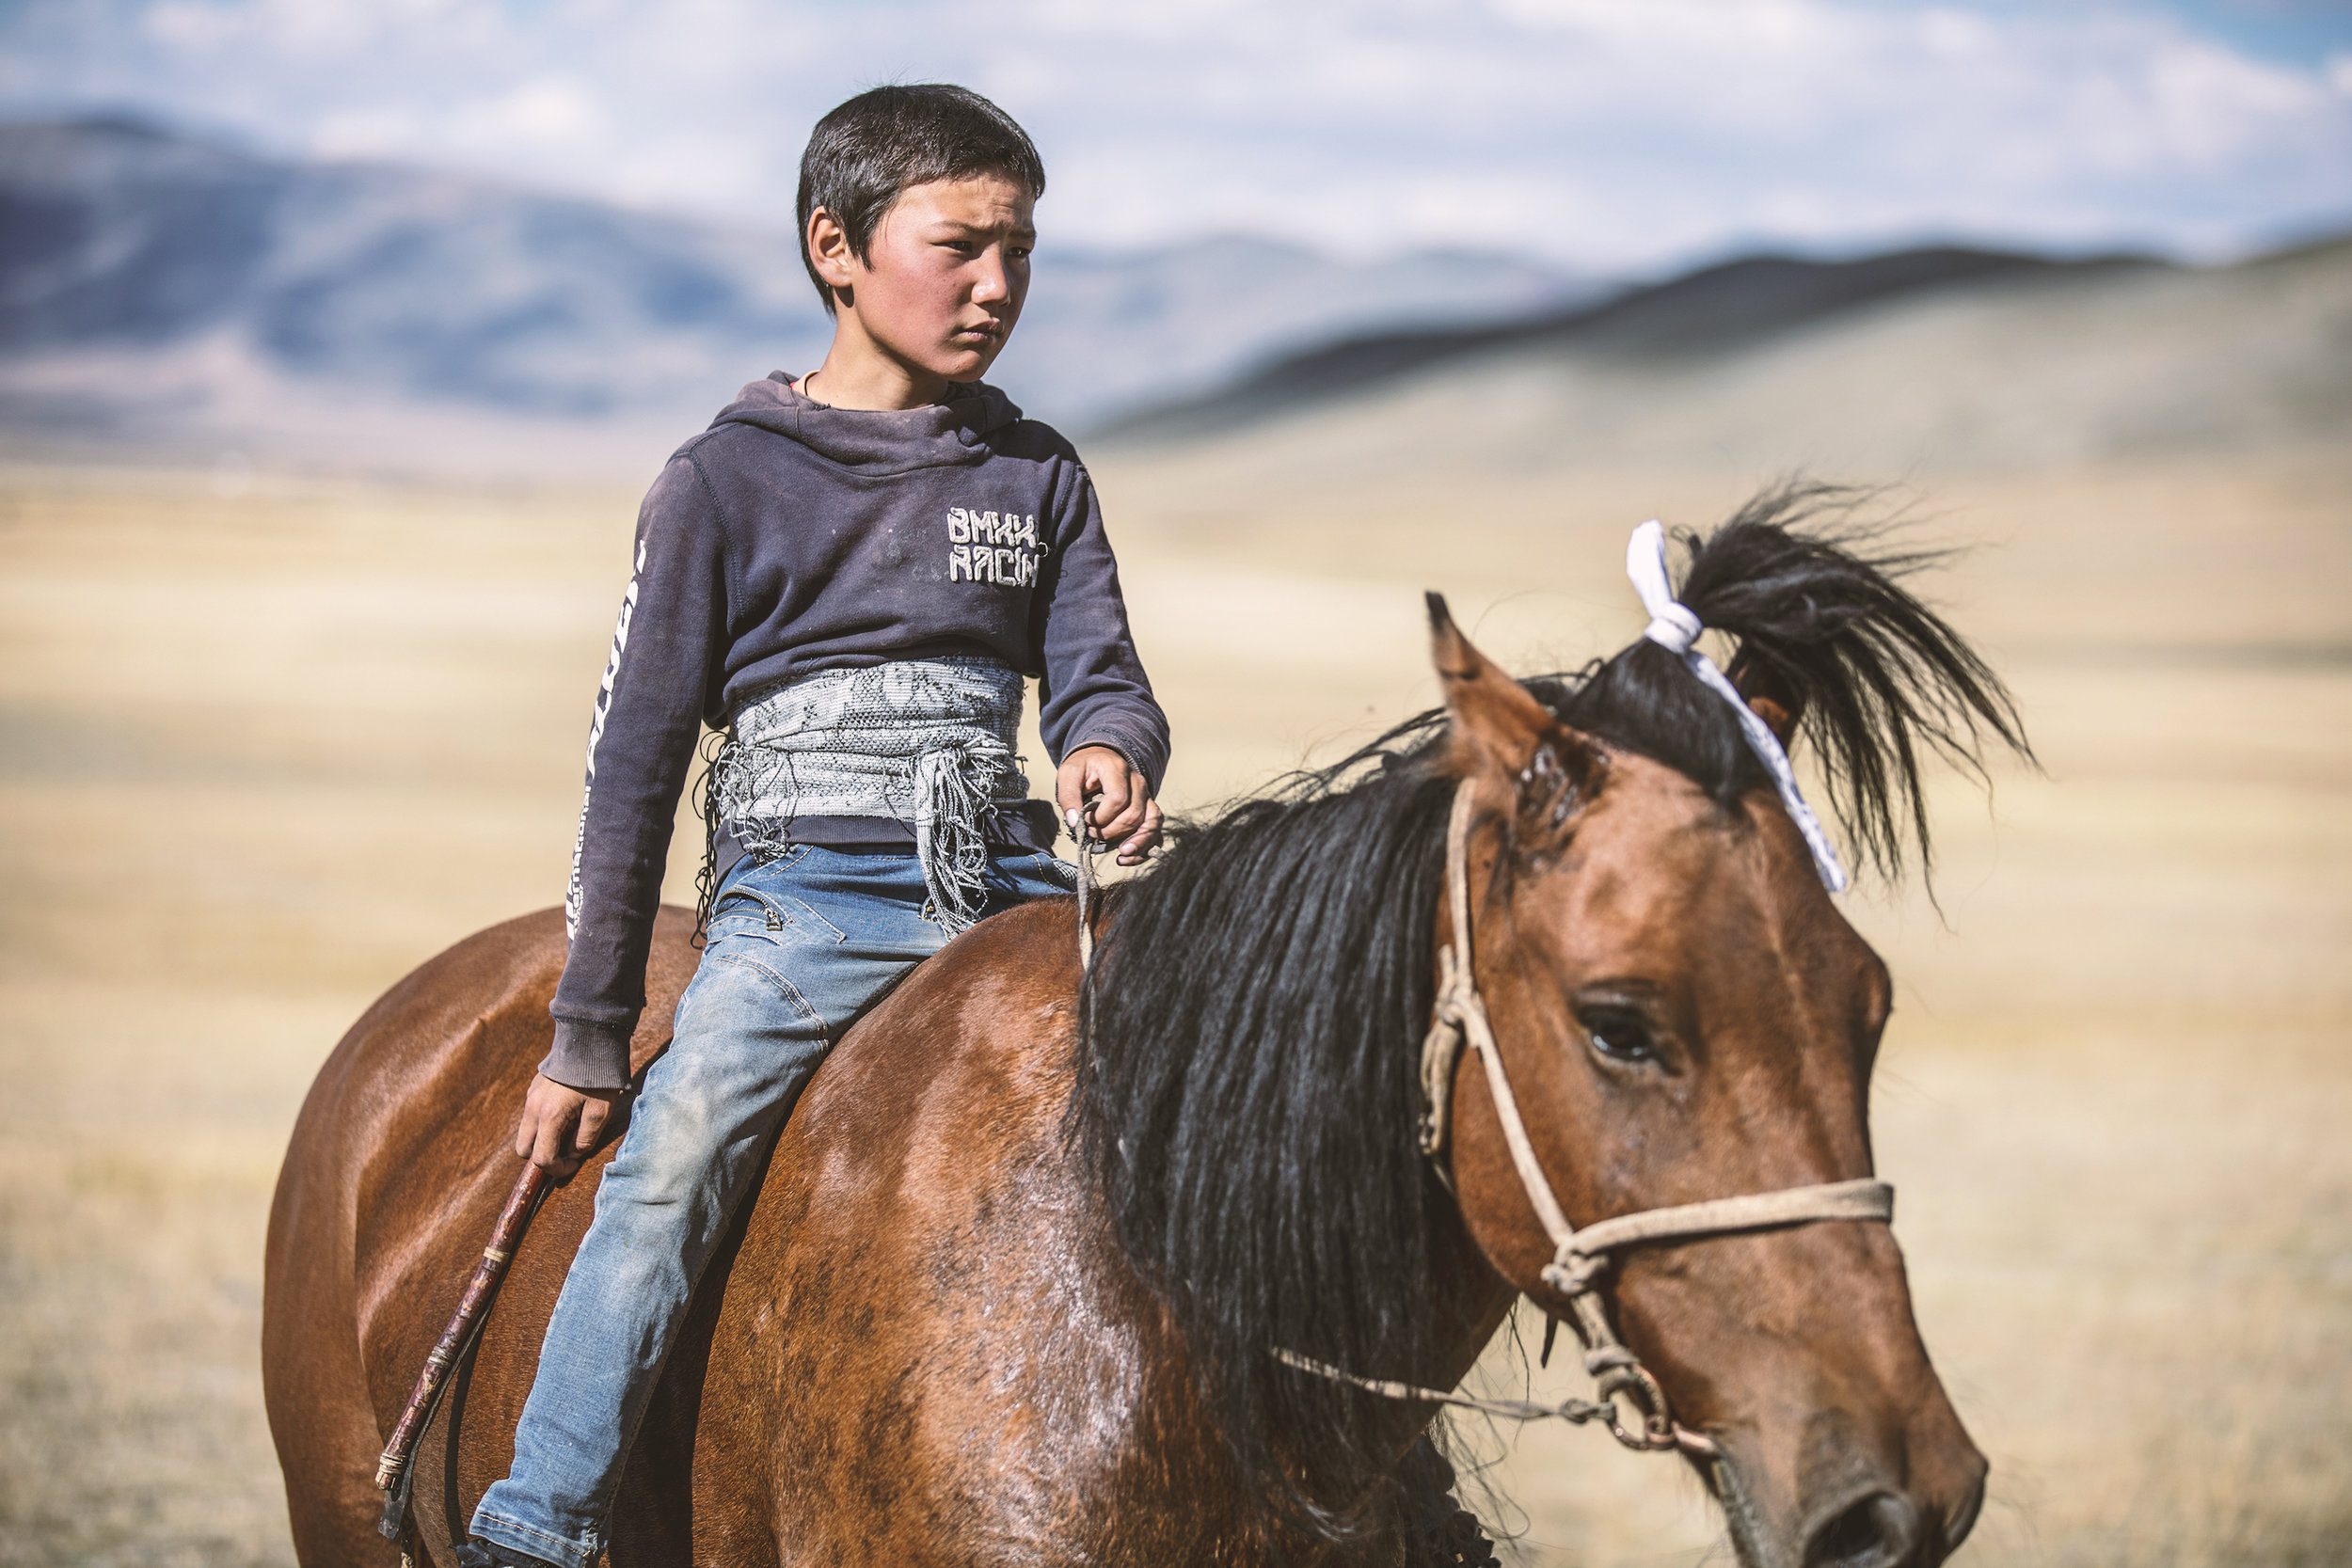 Janibek, a 9-year old Kazakh nomad in the Altai Mountains, Western Mongolia_BOY_NOMAD_aAron_Munson.jpg